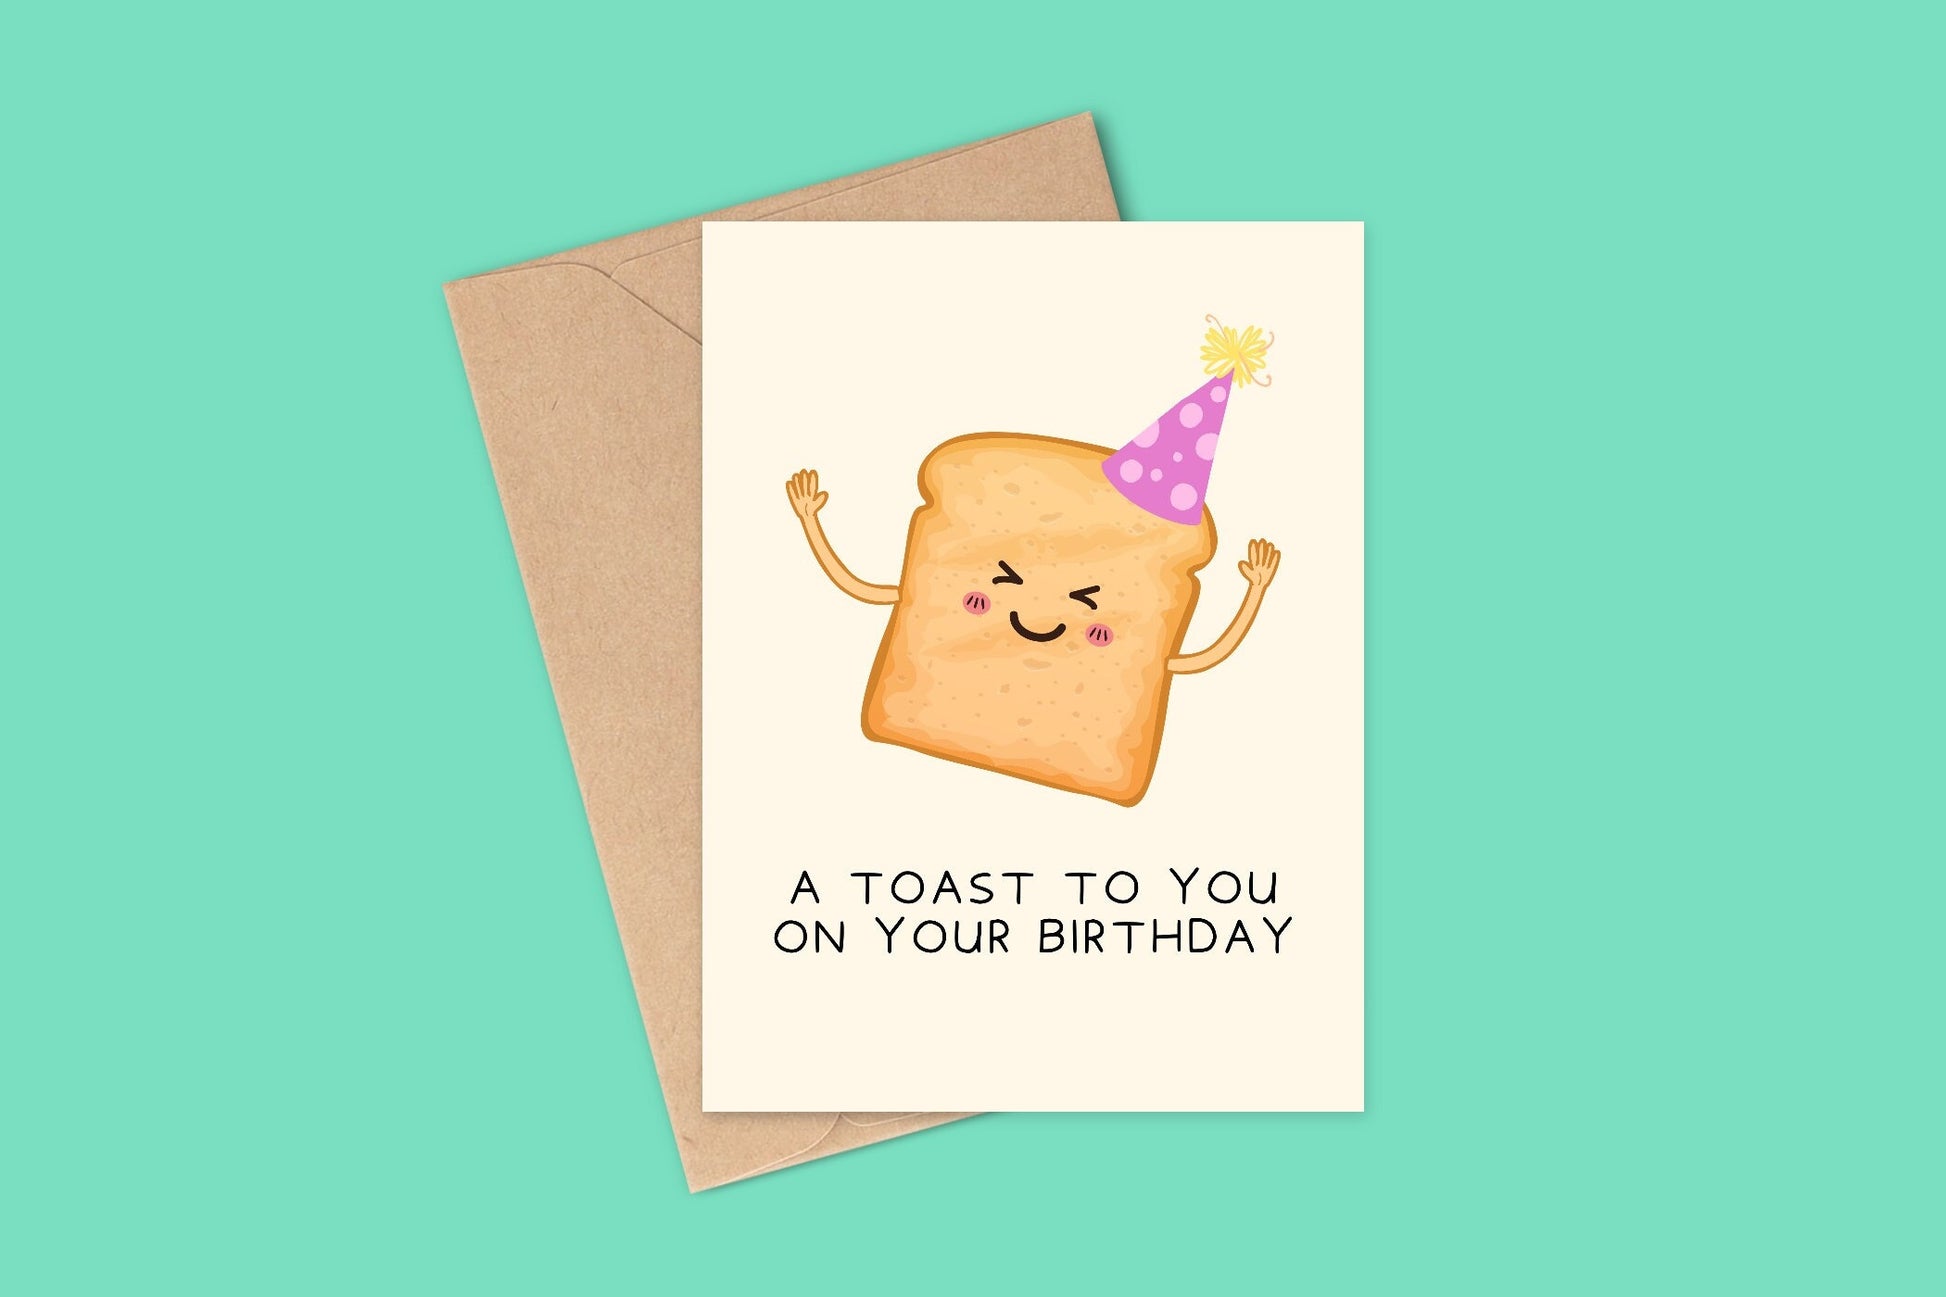 Funny Birthday Card, A Toast To You On Your Birthday Card, Funny Card, Birthday card, Toast Illustration, Funny Birthday Cards,